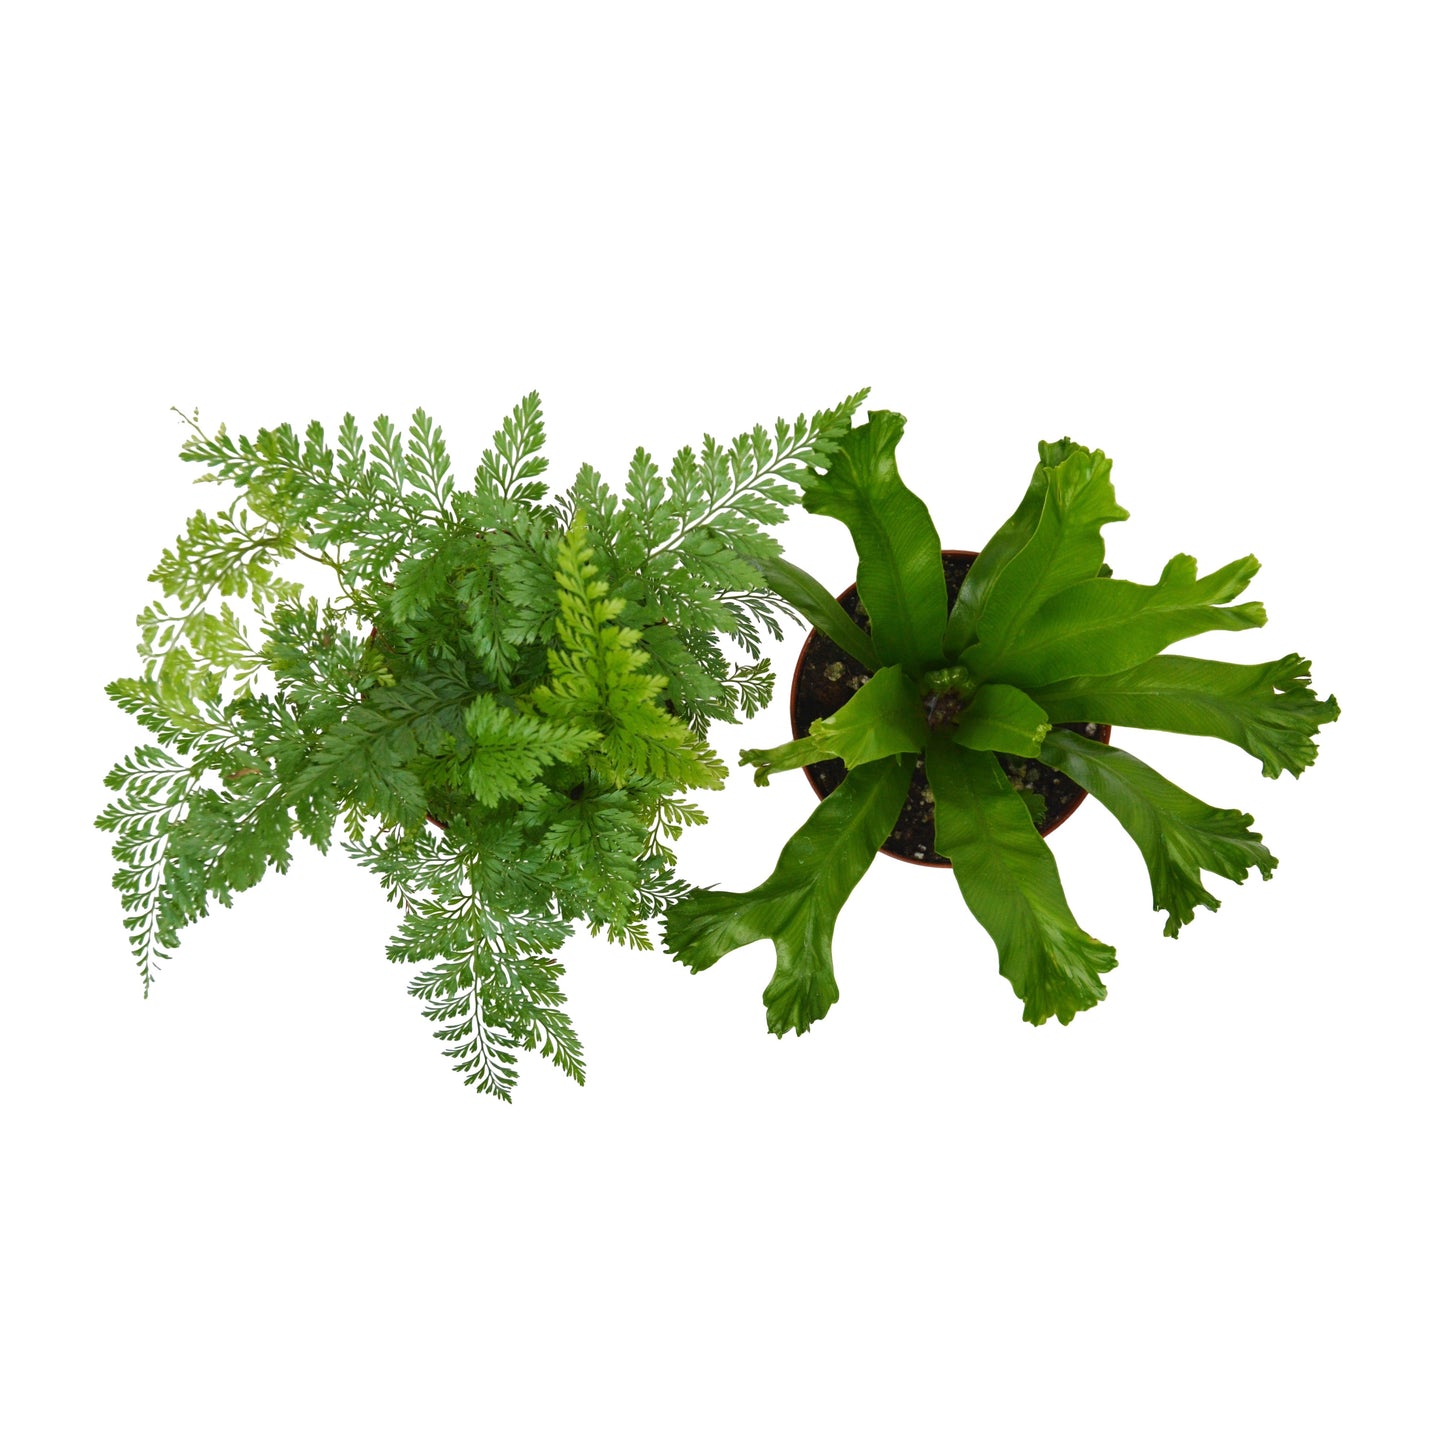 2 Fern Variety Pack - Live Plants - FREE Care Guide - 4" Pot - House Plant